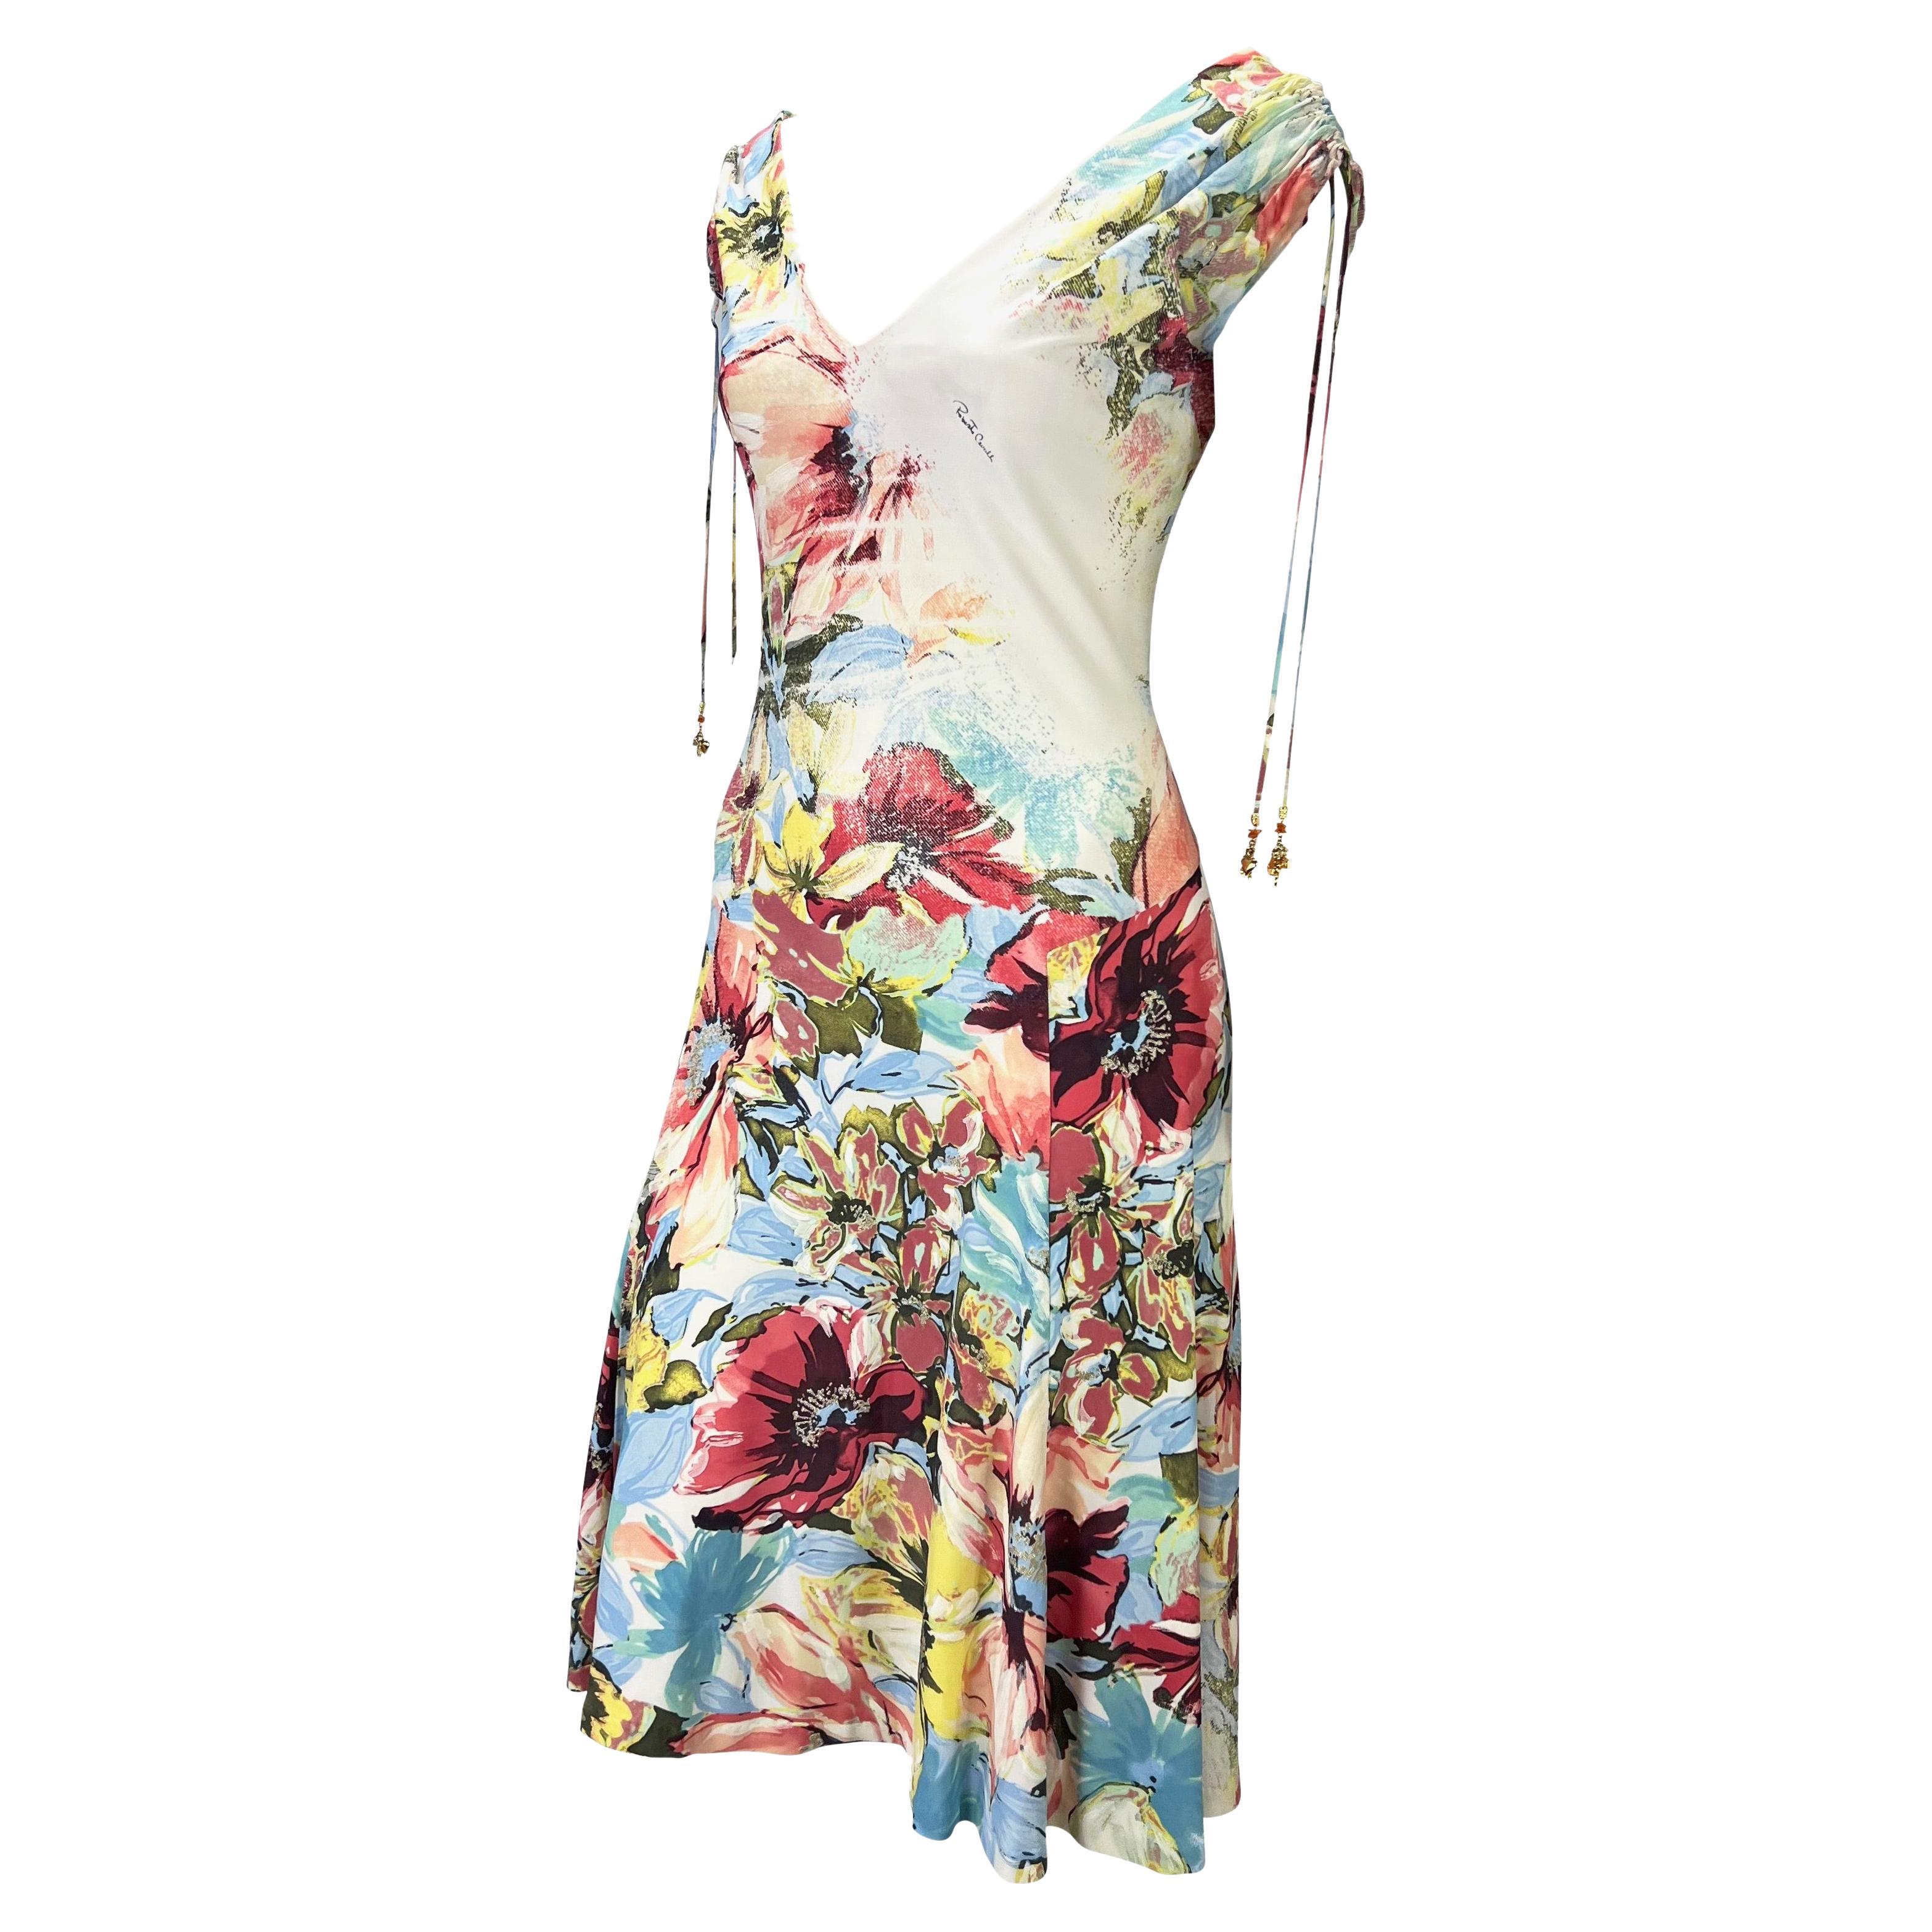 Presenting a stunning cream and multicolor floral Roberto Cavalli dress. From the Spring/Summer 2003 collection, this off-the-shoulder dress features a v-neckline, flared skirt, and hanging charms coming from the shoulder. Effortlessly chic, this